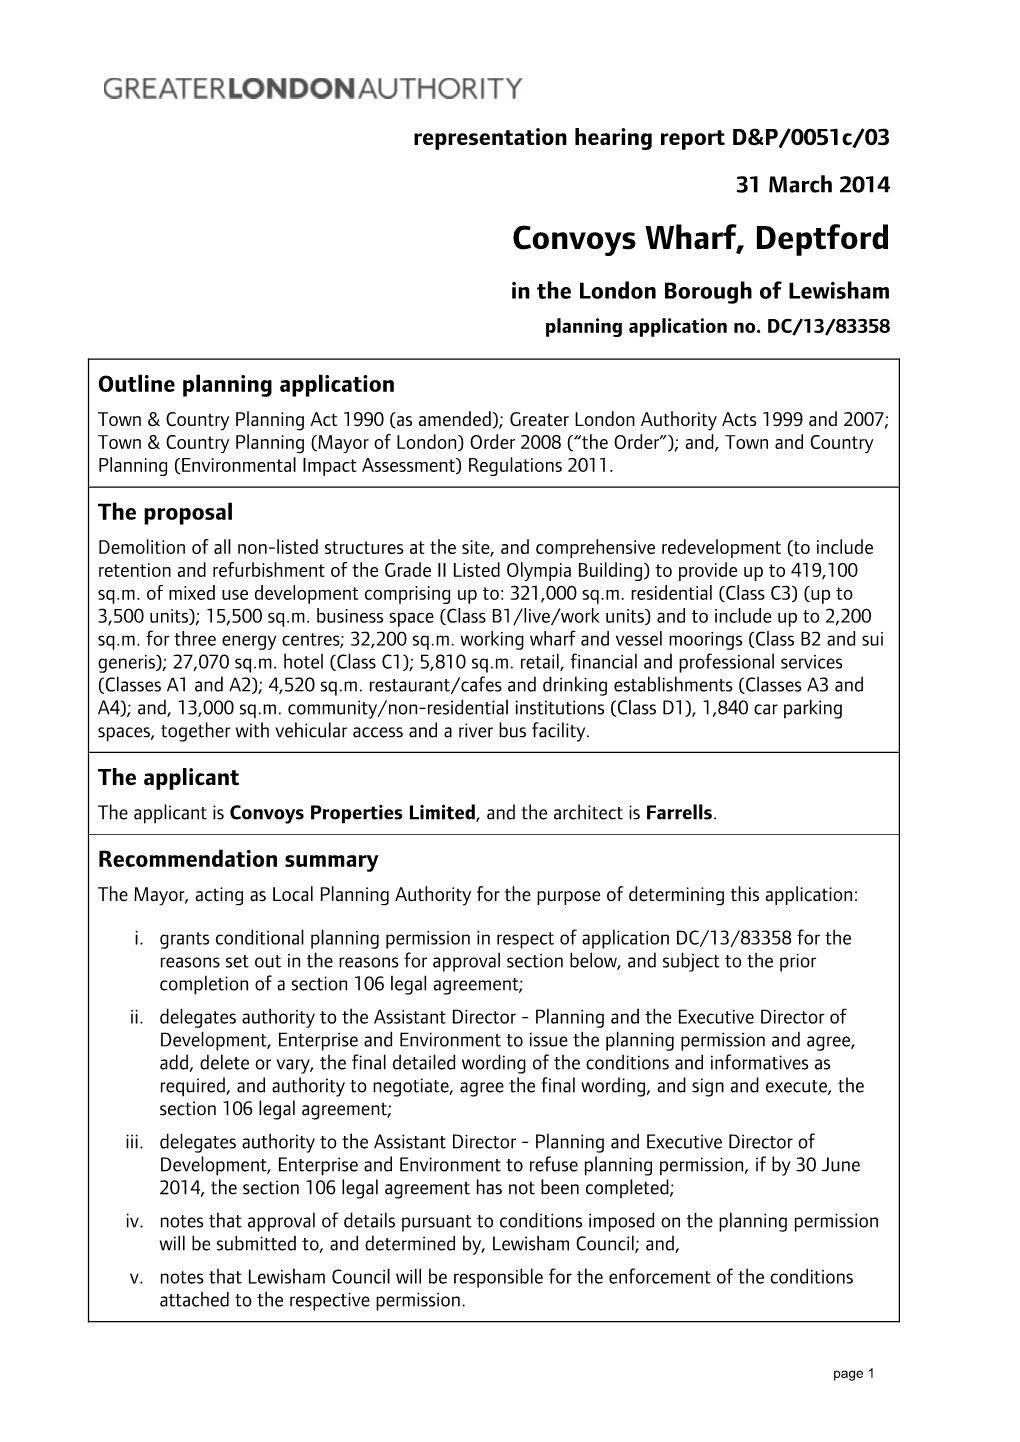 Convoys Wharf, Deptford in the London Borough of Lewisham Planning Application No